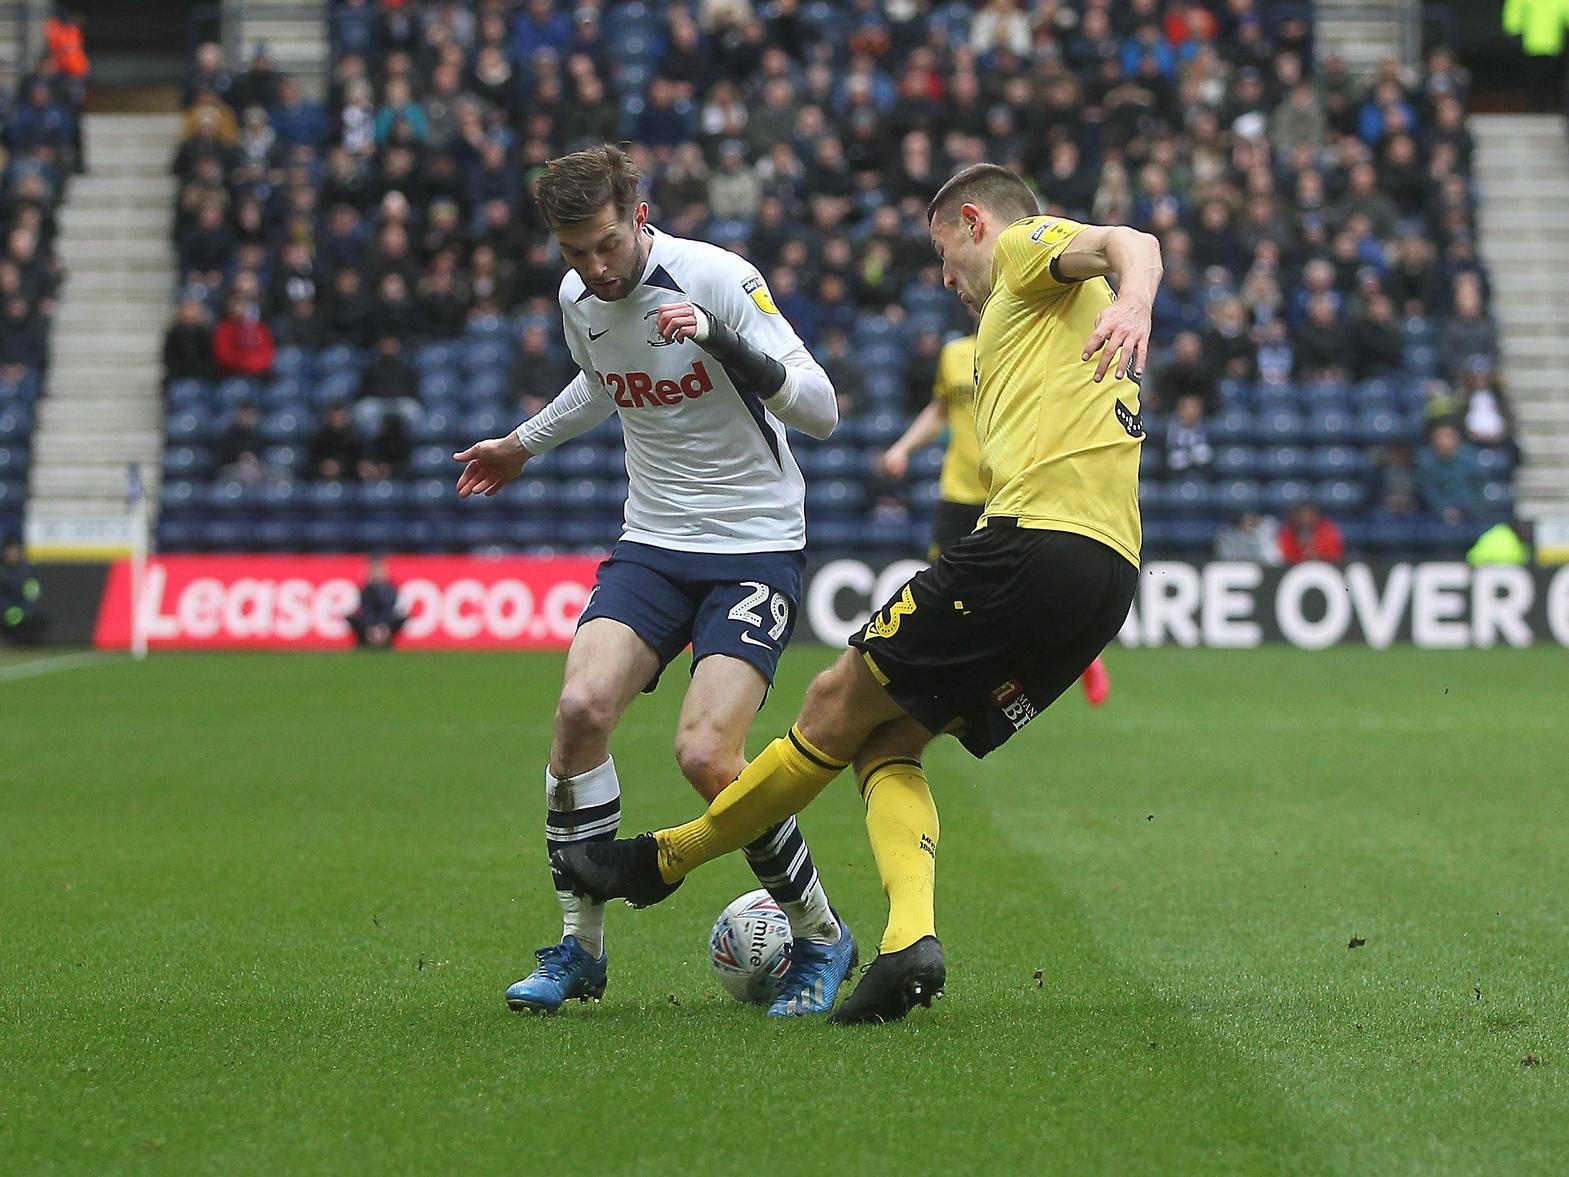 Carried PNE's main attacking threat - could have had an early penalty, set-up chances for Sinclair and Johnson.